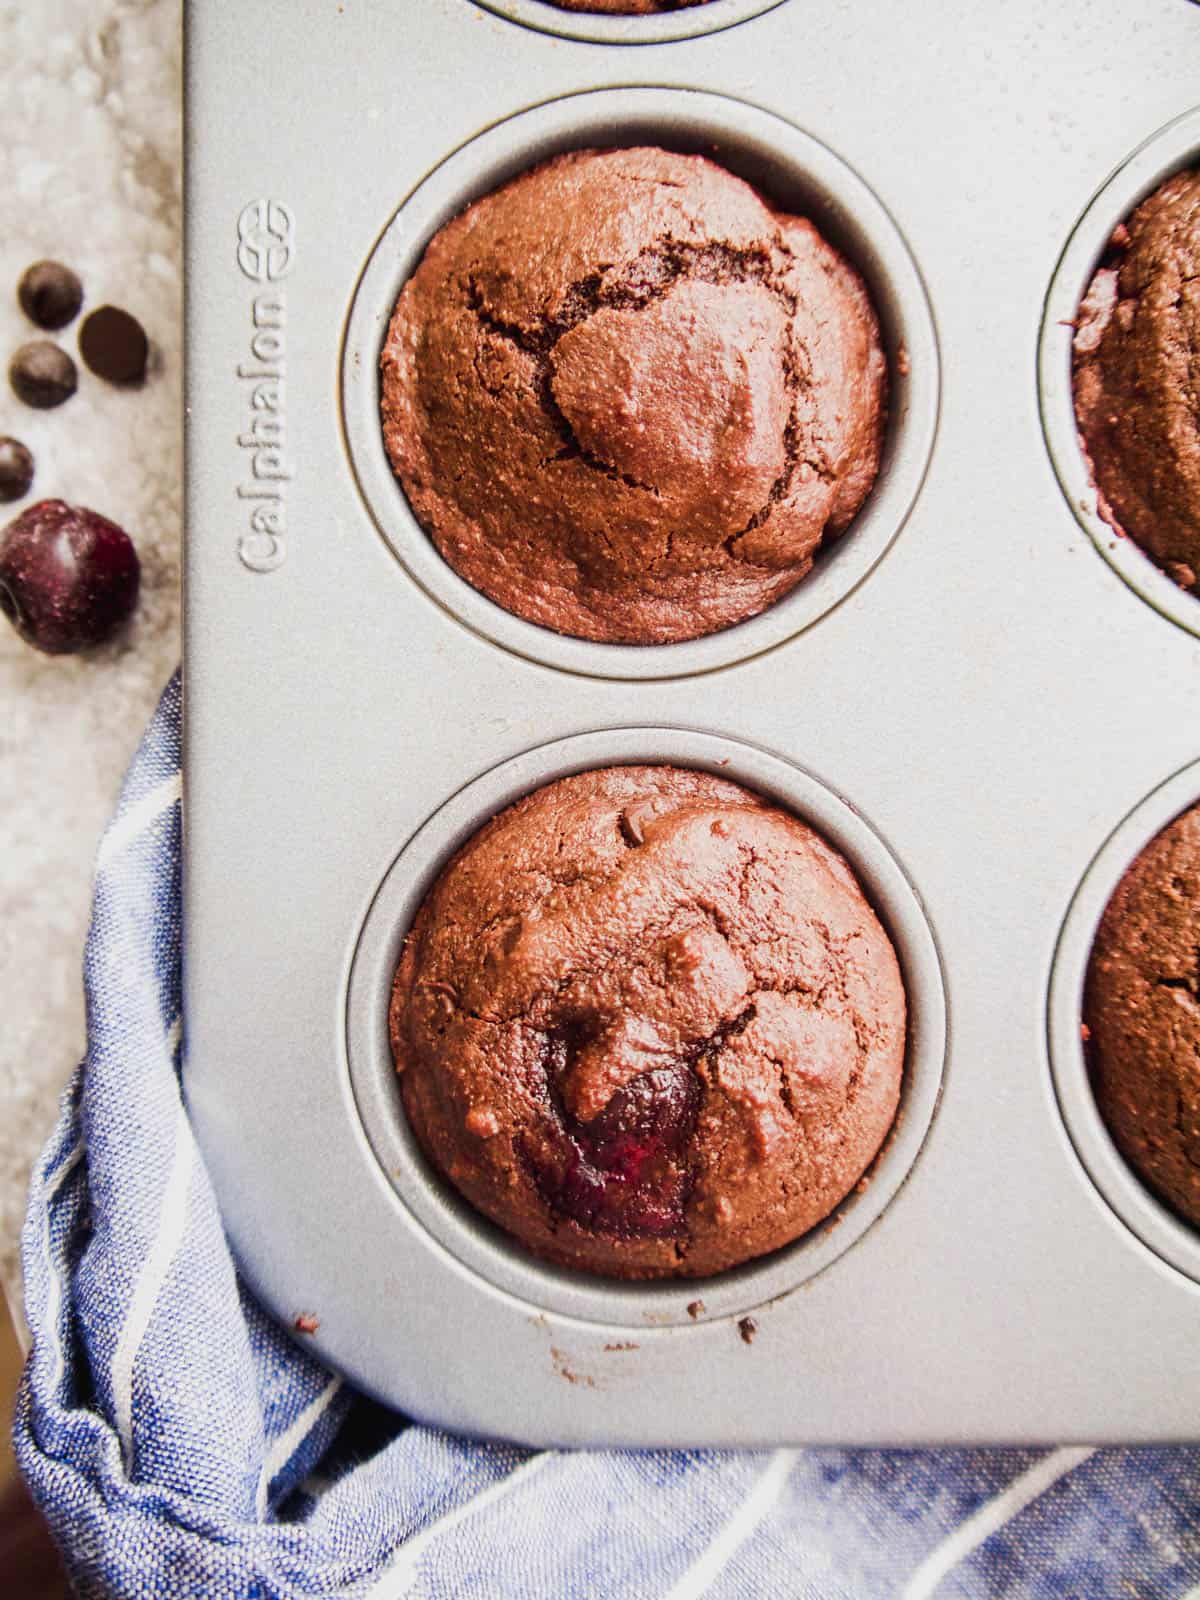 Chocolate paleo muffins with cherries in a loaf tin.